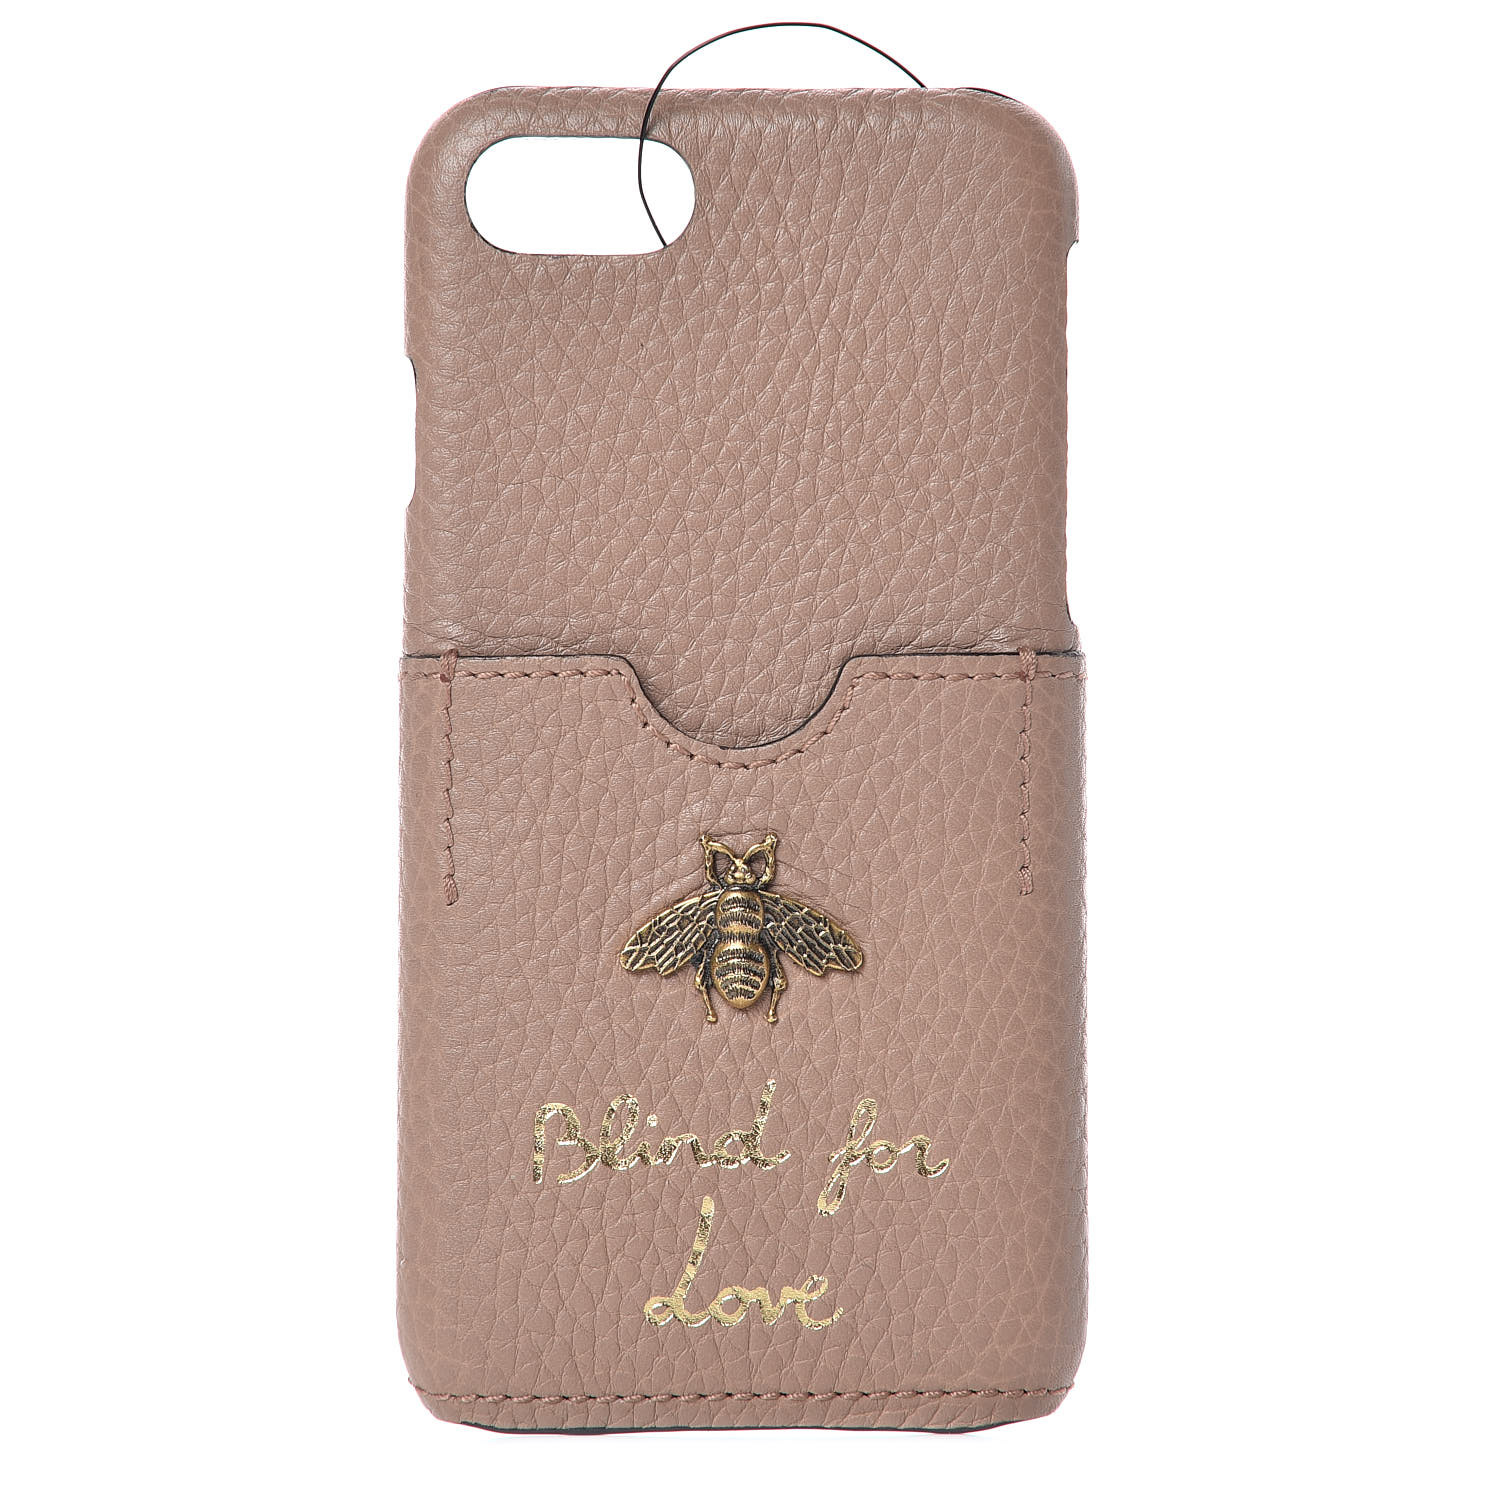 blind for love gucci phone case